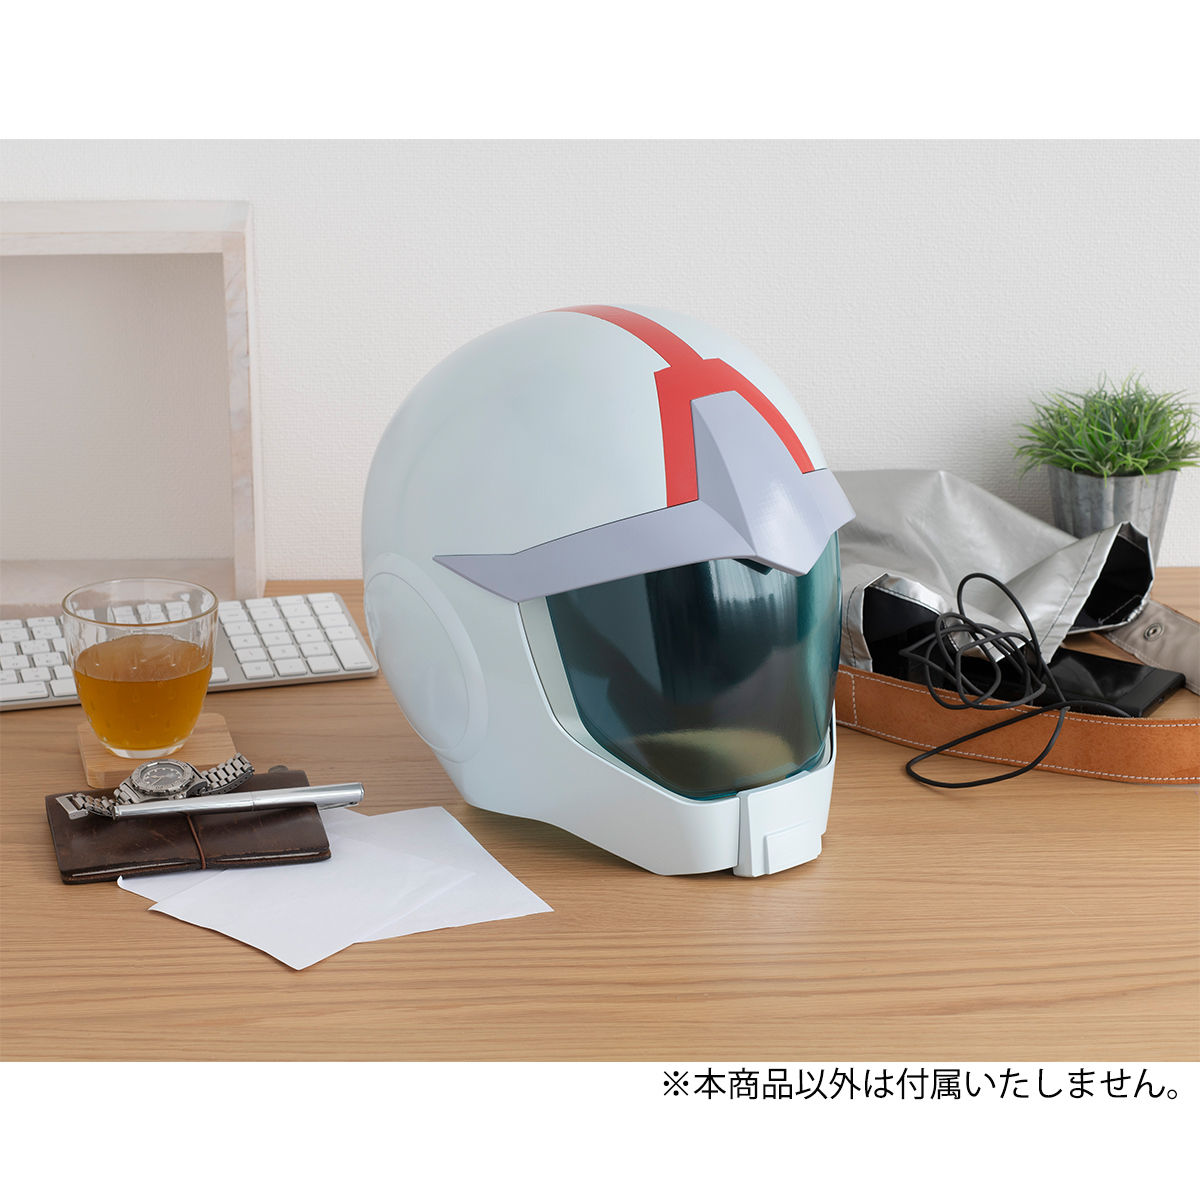 MegaHouse Full Scale Works Earth Federation Force Normal Suit Helmet